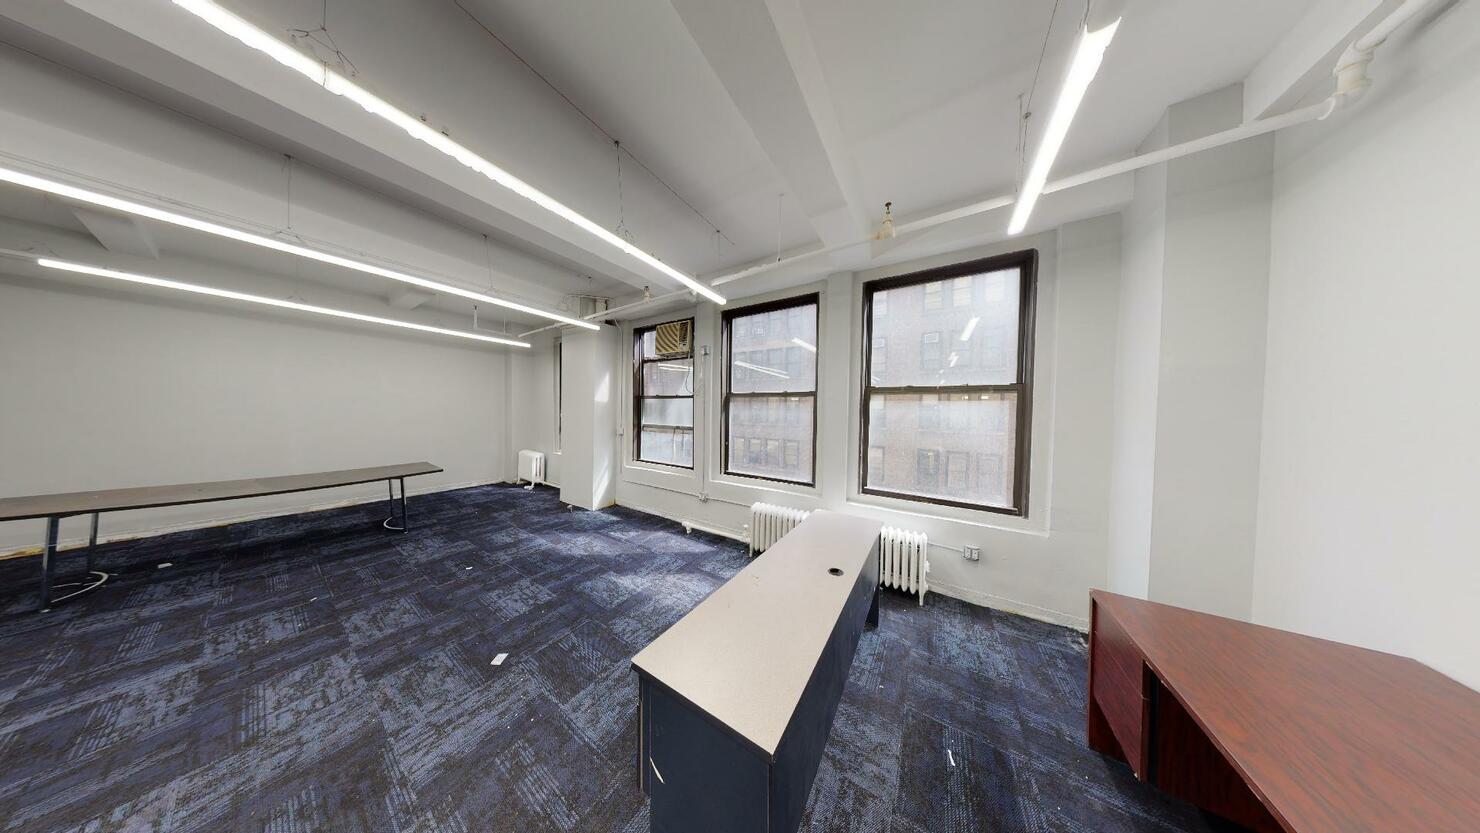 255 West 36th Street Office Space - Large Windows